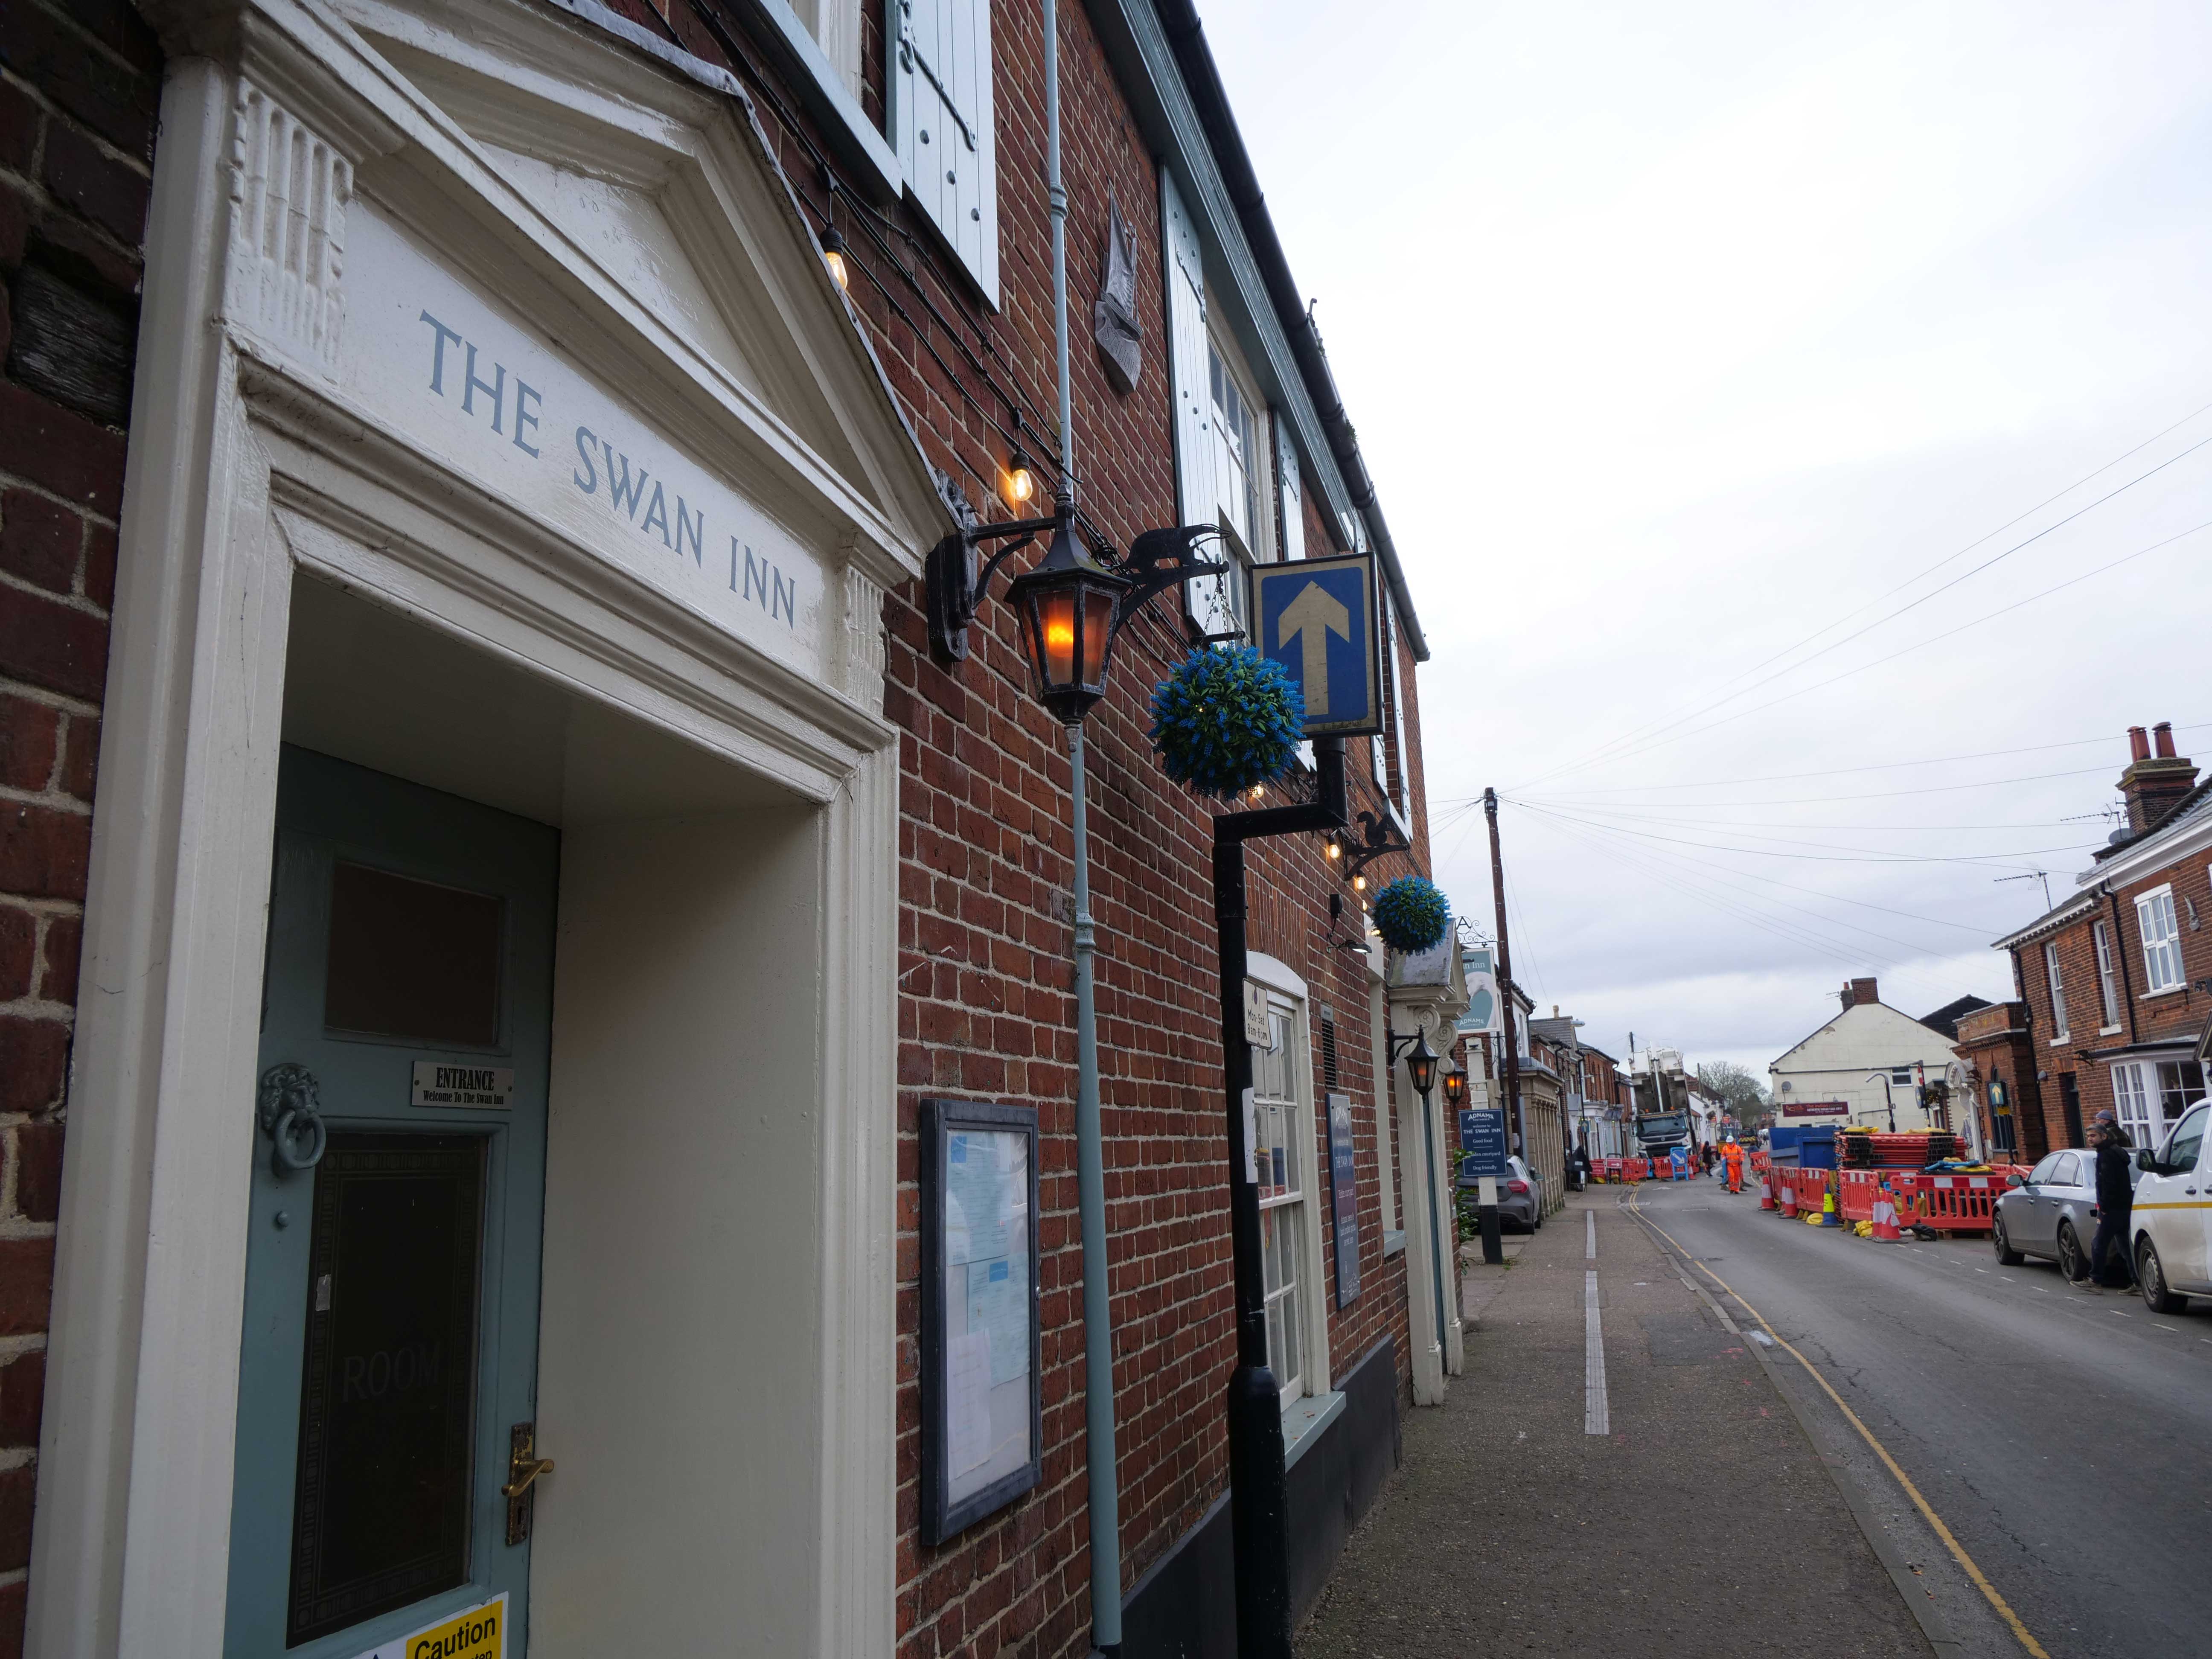 Home | Stalham is open for business 